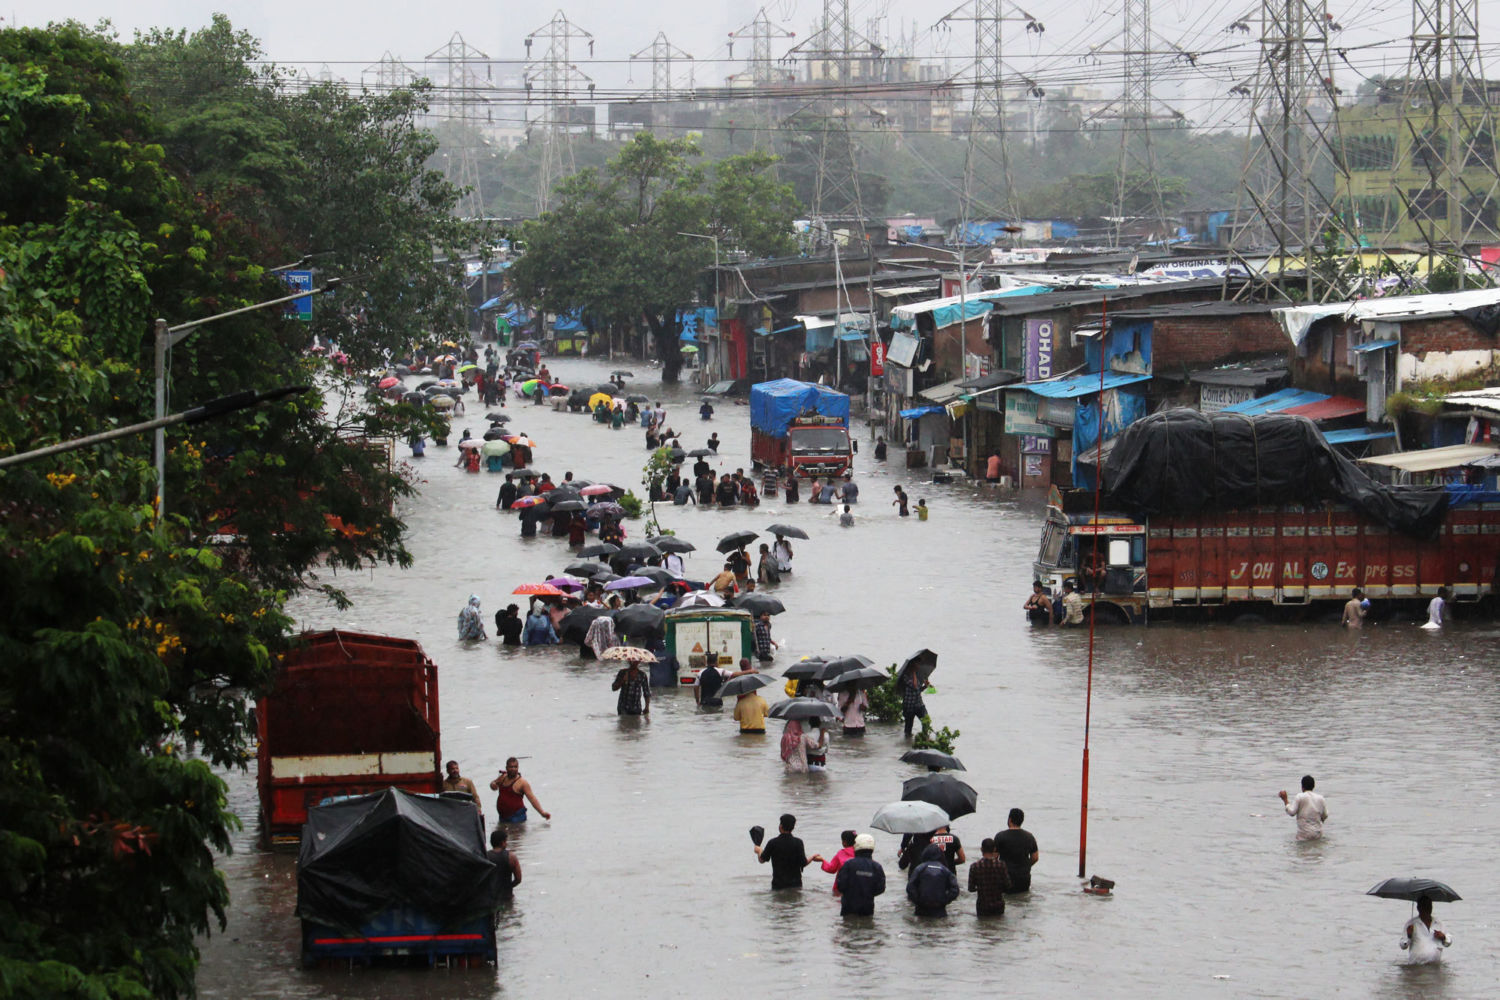 As the Monsoon and Climate Shift, India Faces Worsening Floods Yale E360